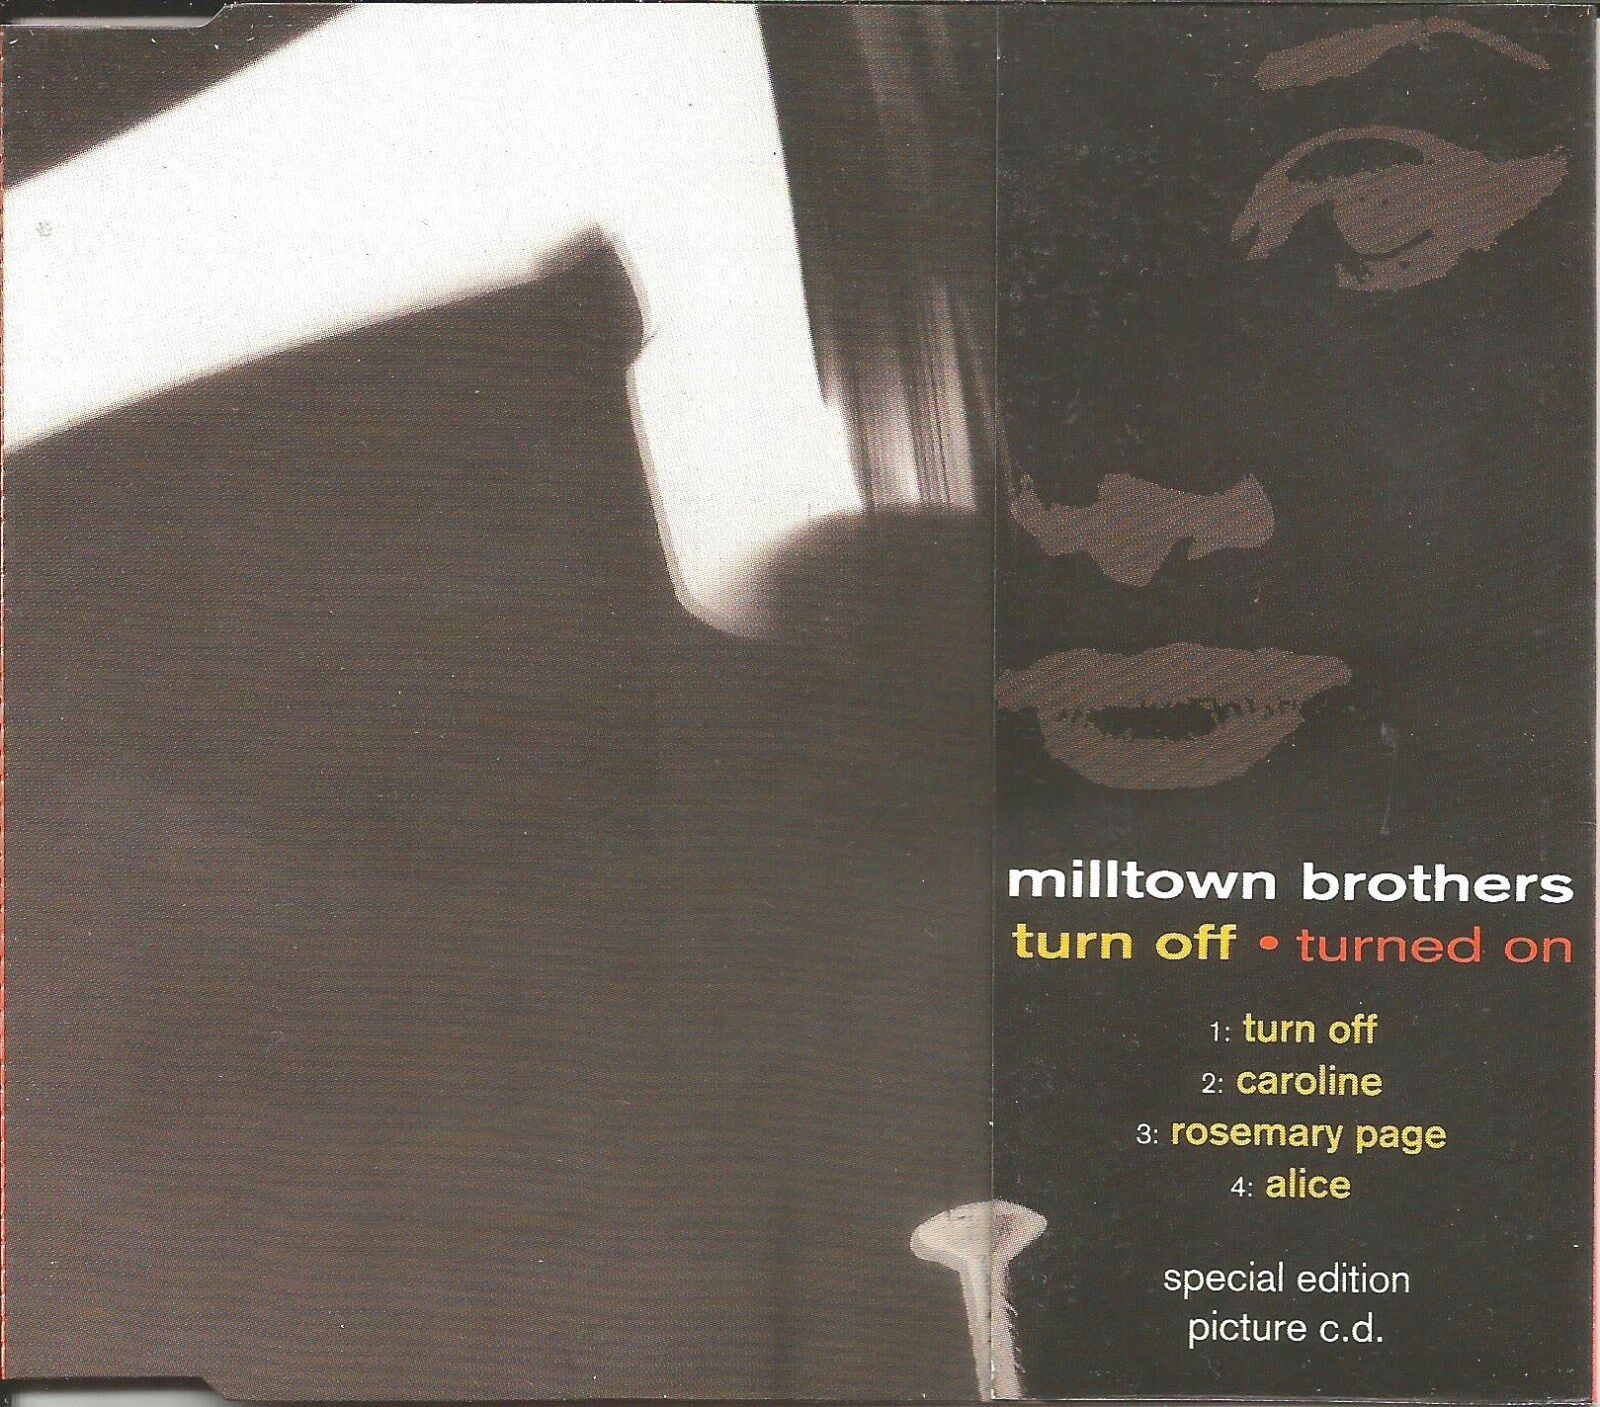 MILLTOWN BROTHERS Turned off  3UNRELEASE PICTURE DISC CD single SEALED USA SELER